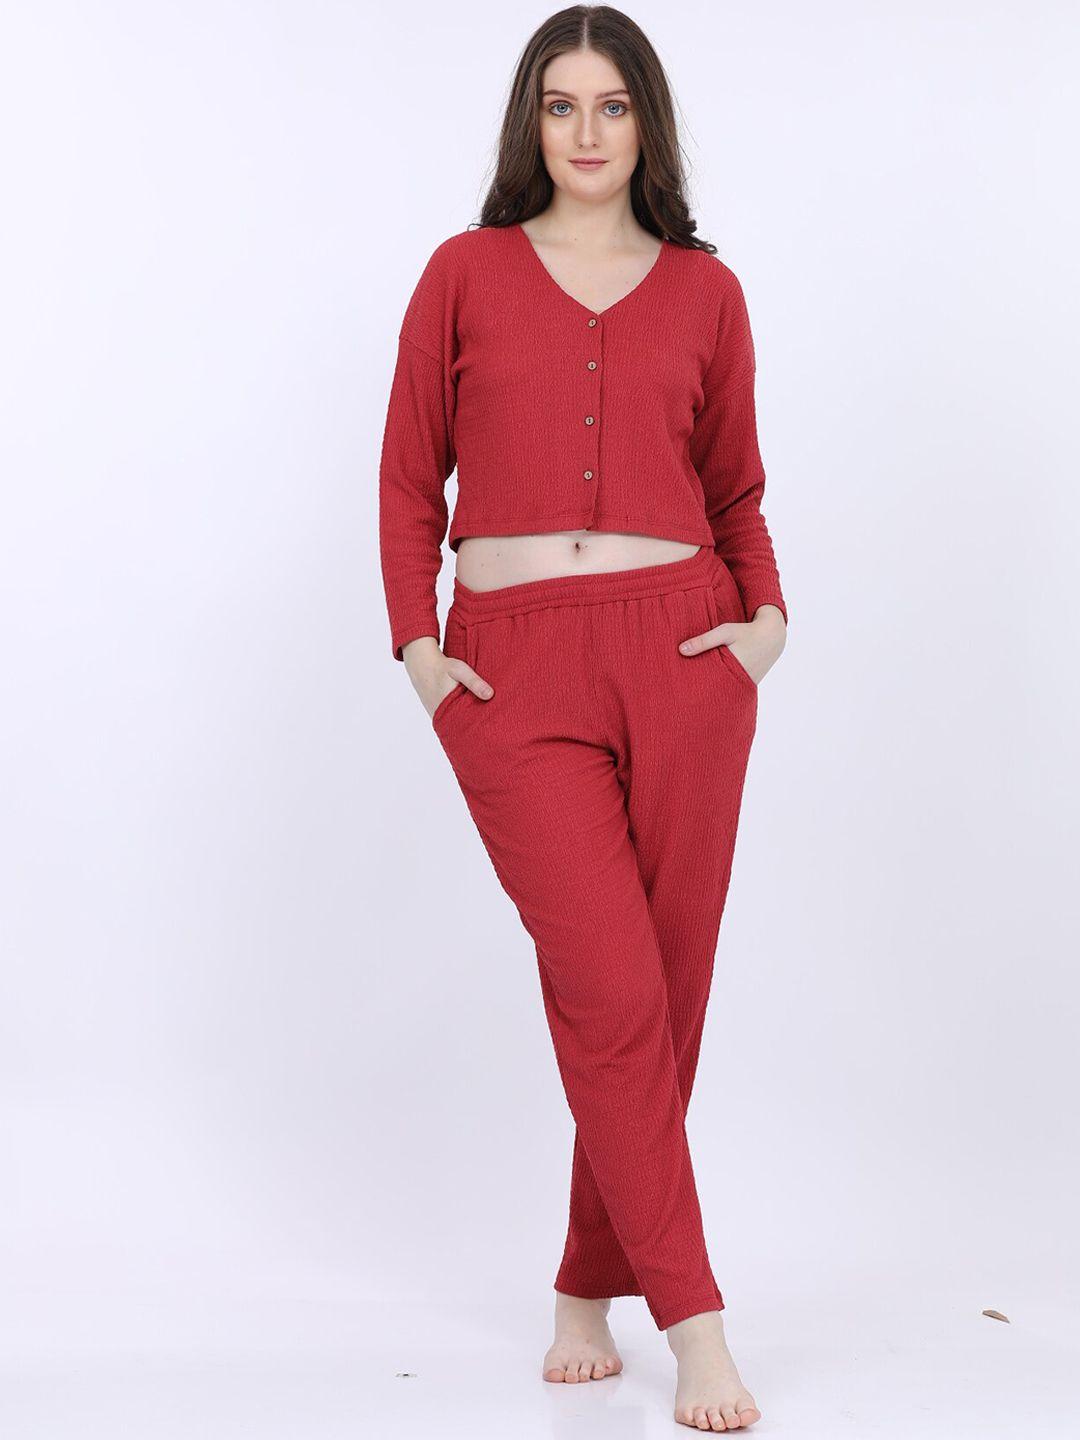 maysixty ribbed v-neck crop night suit